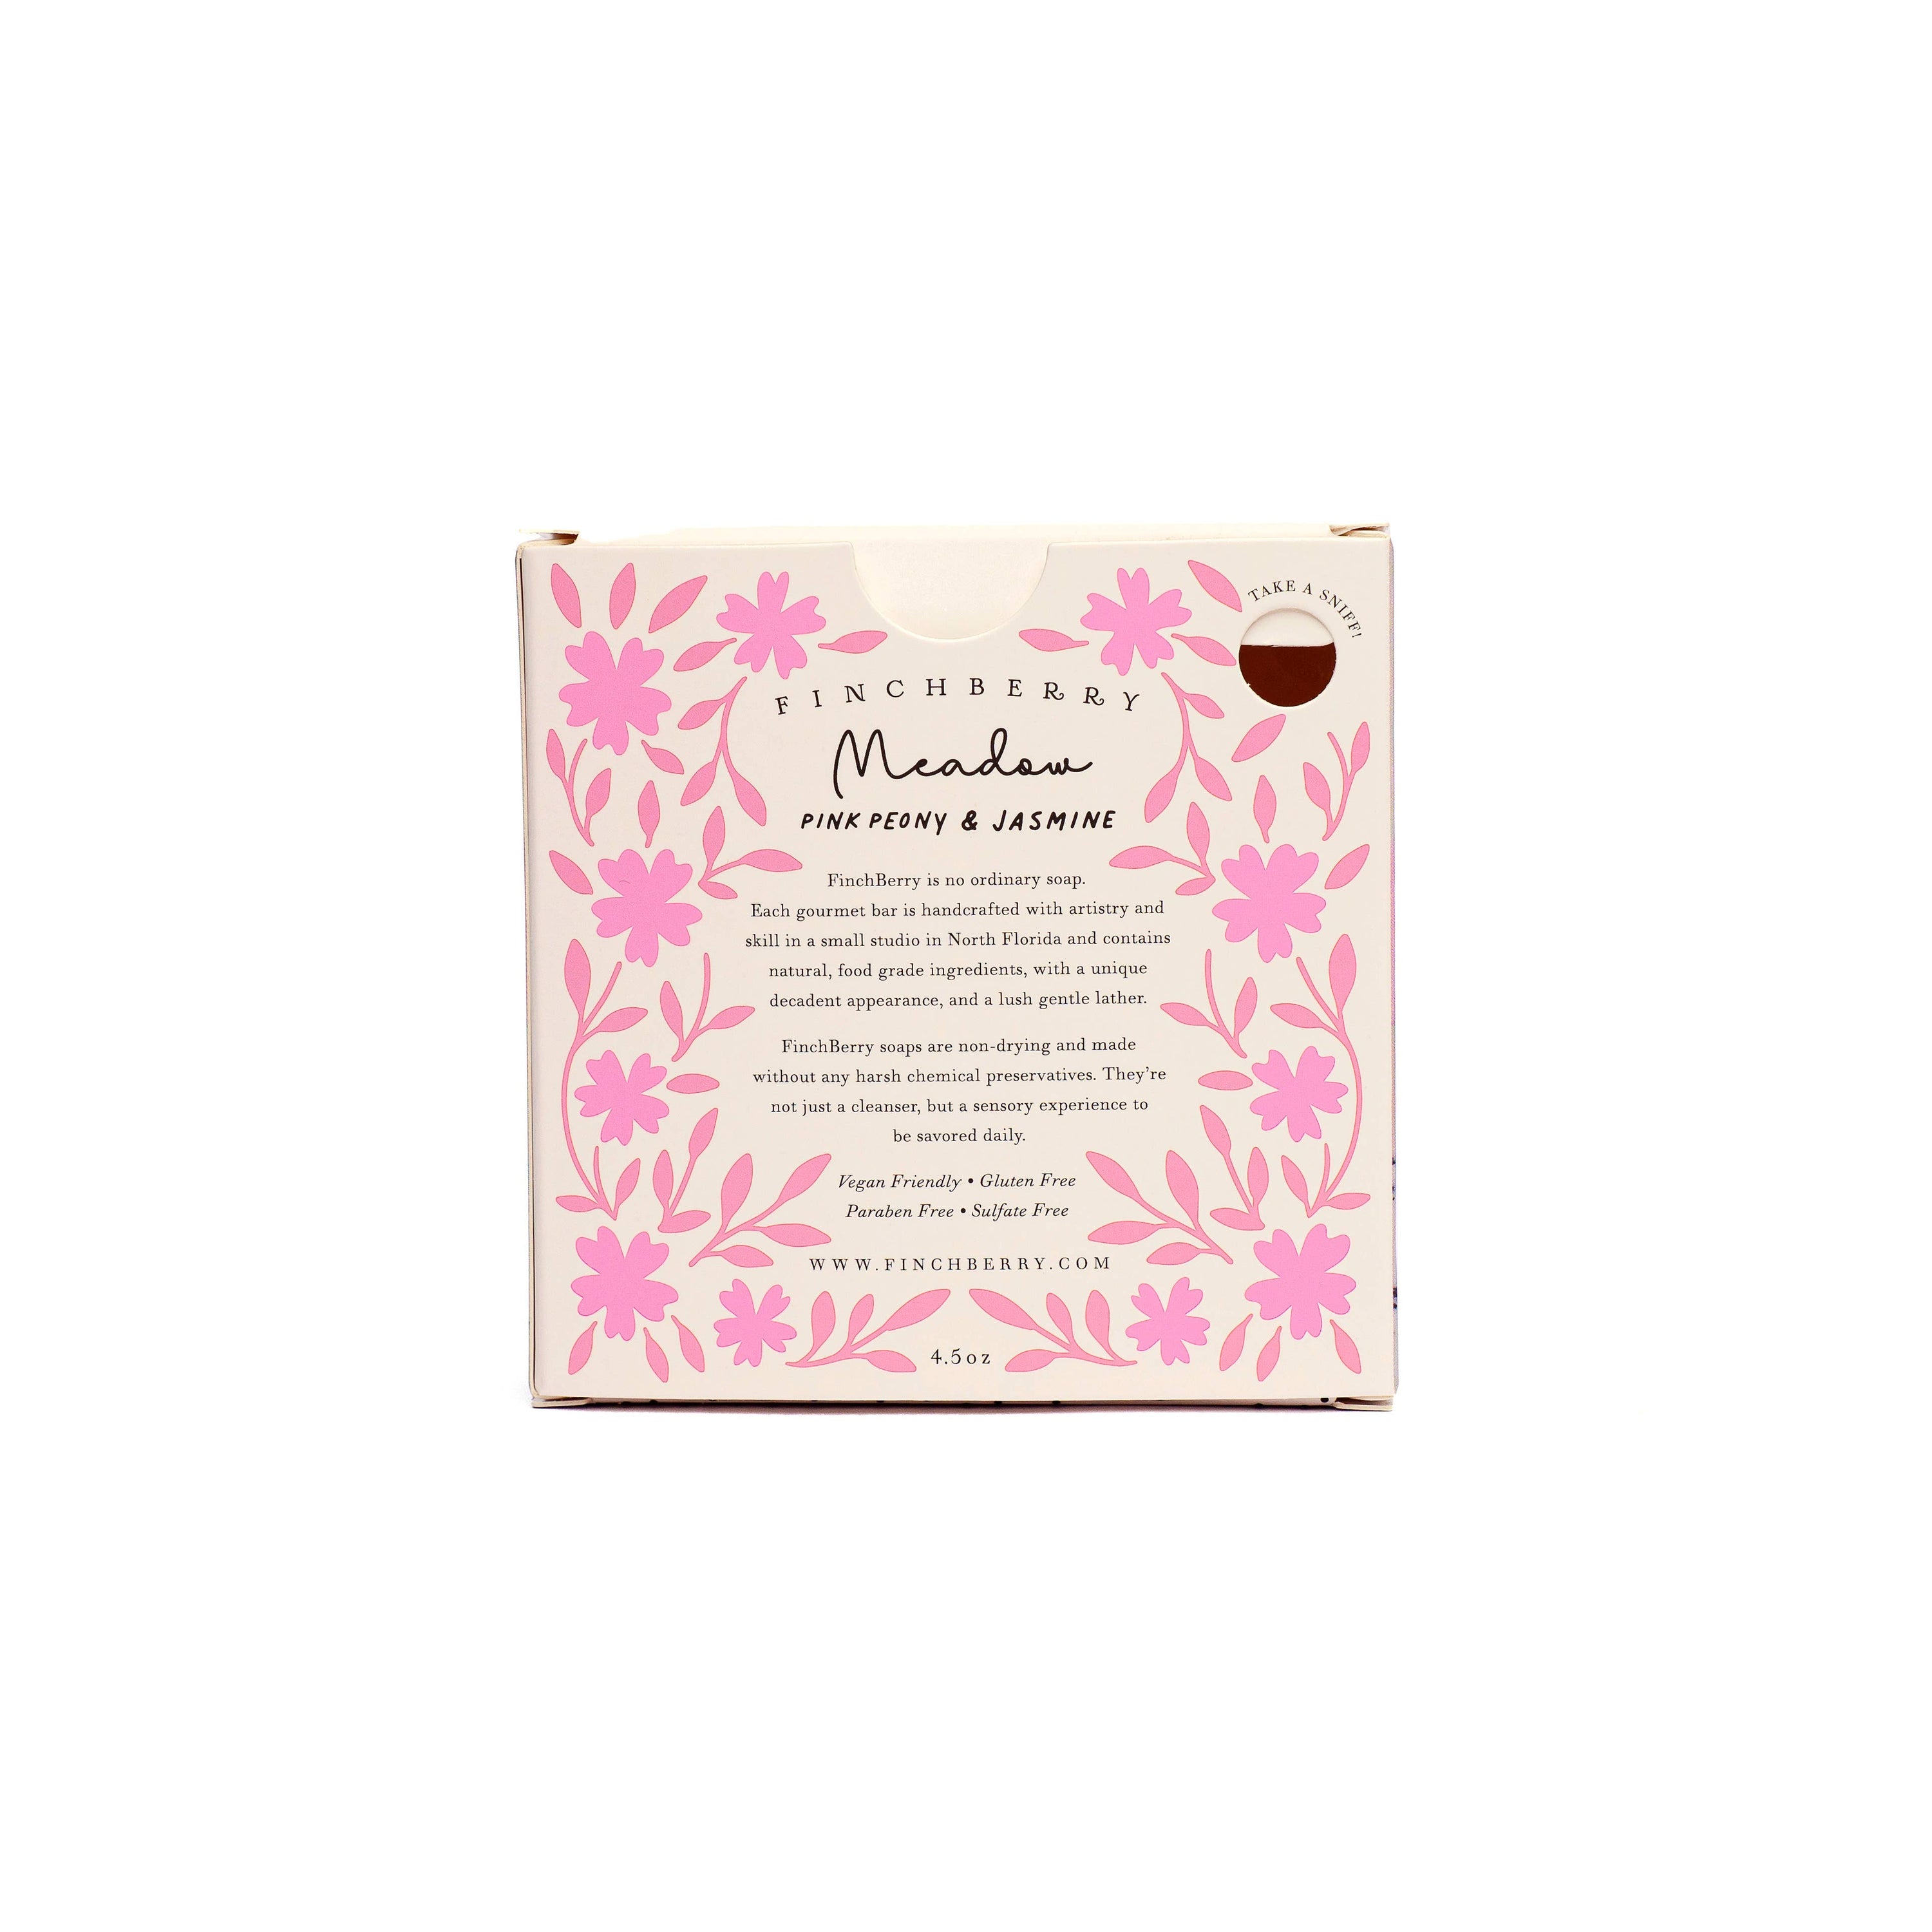 Finchberry Meadow Boxed Soap